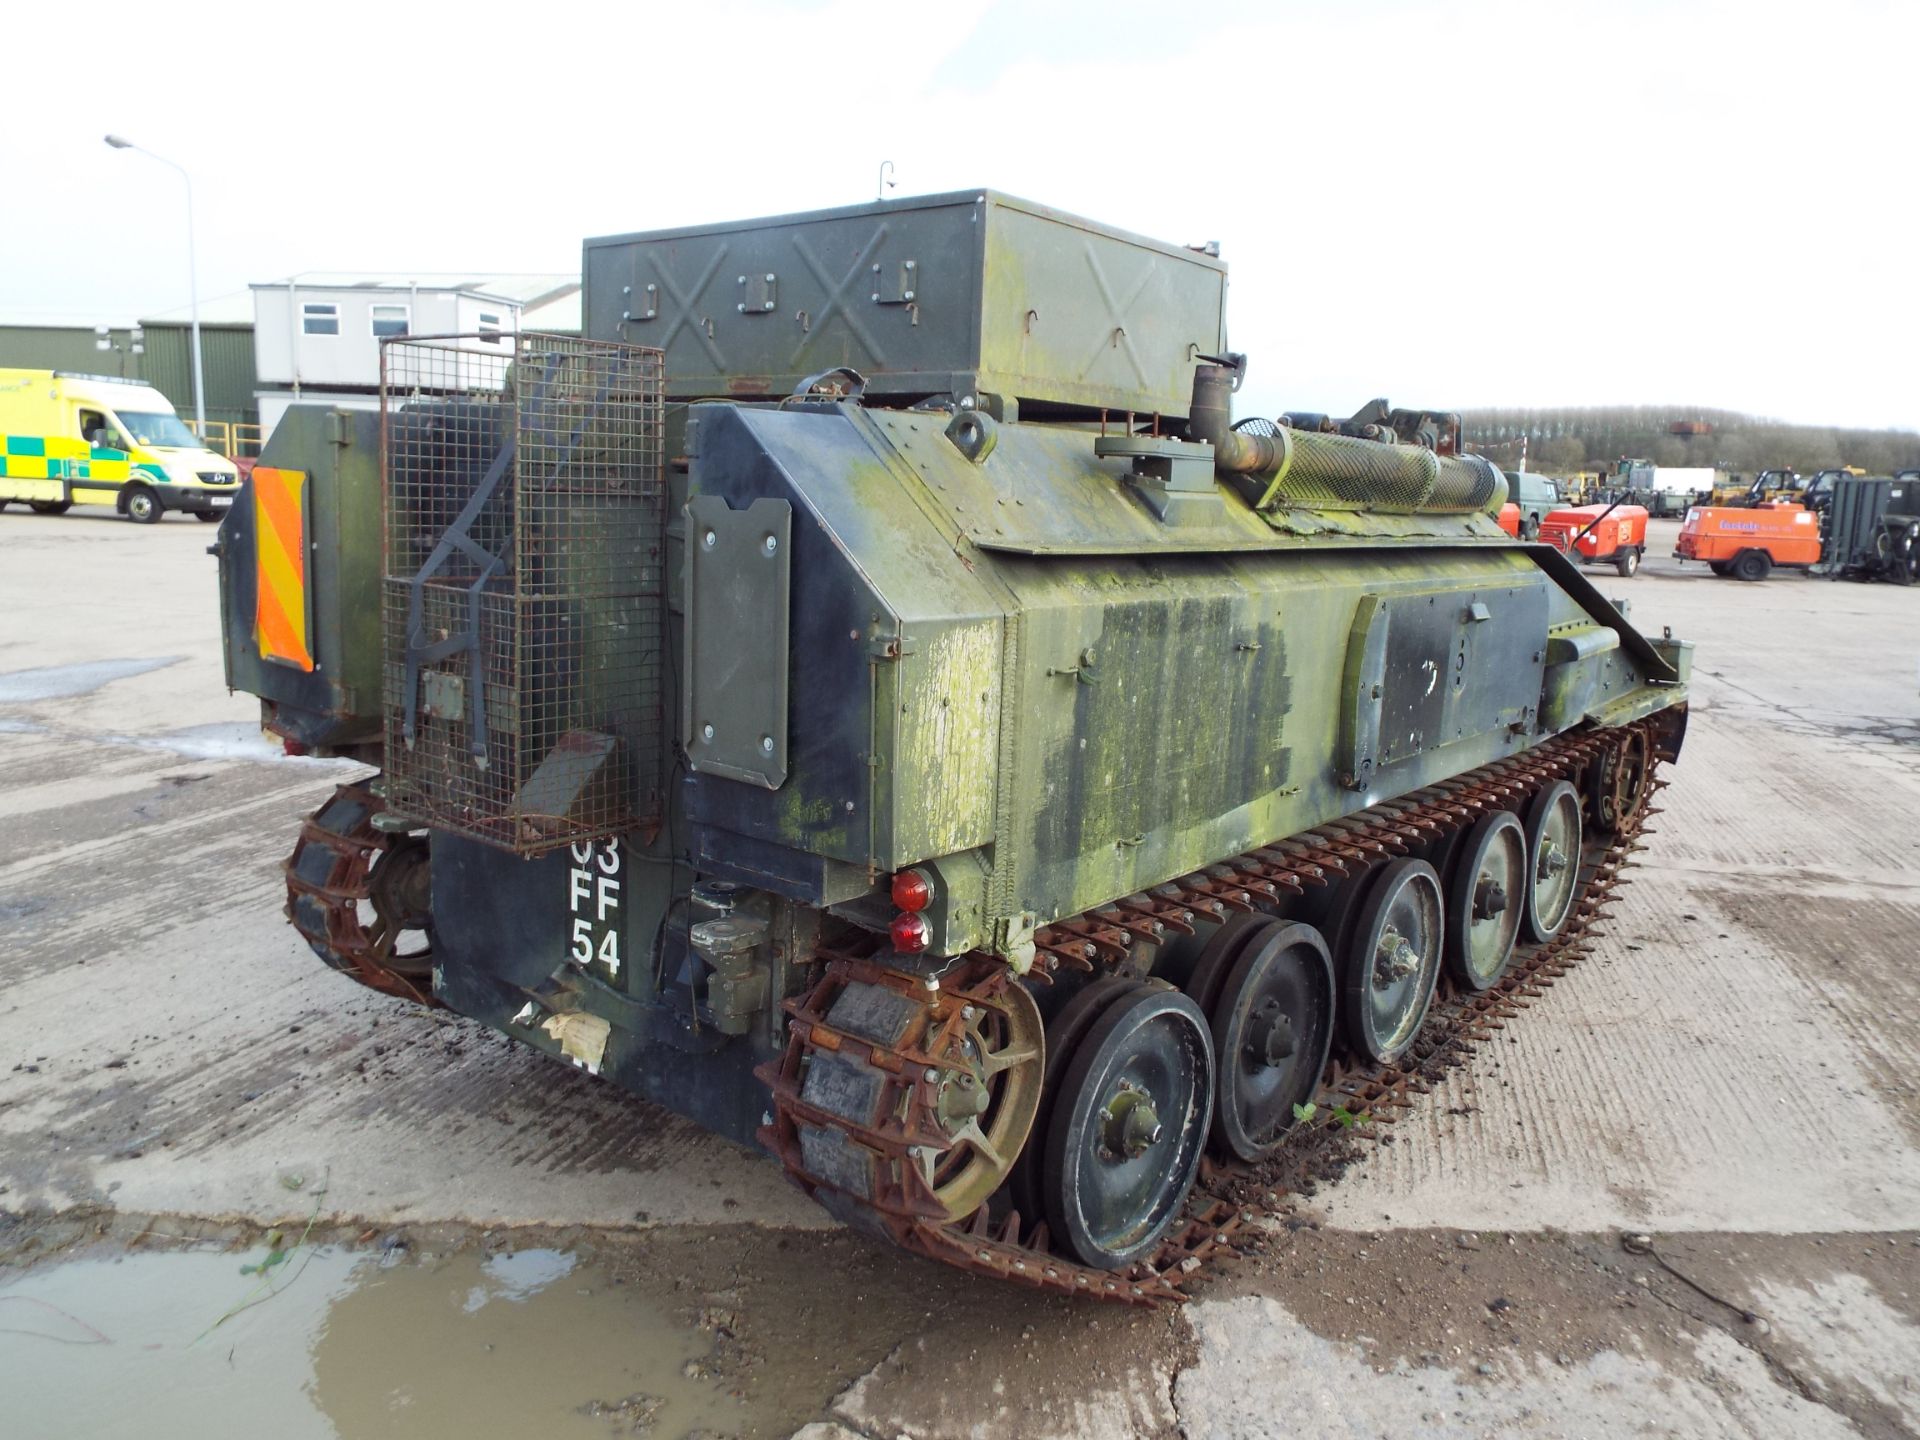 CVRT (Combat Vehicle Reconnaissance Tracked) Spartan Armoured Personnel Carrier - Image 7 of 29